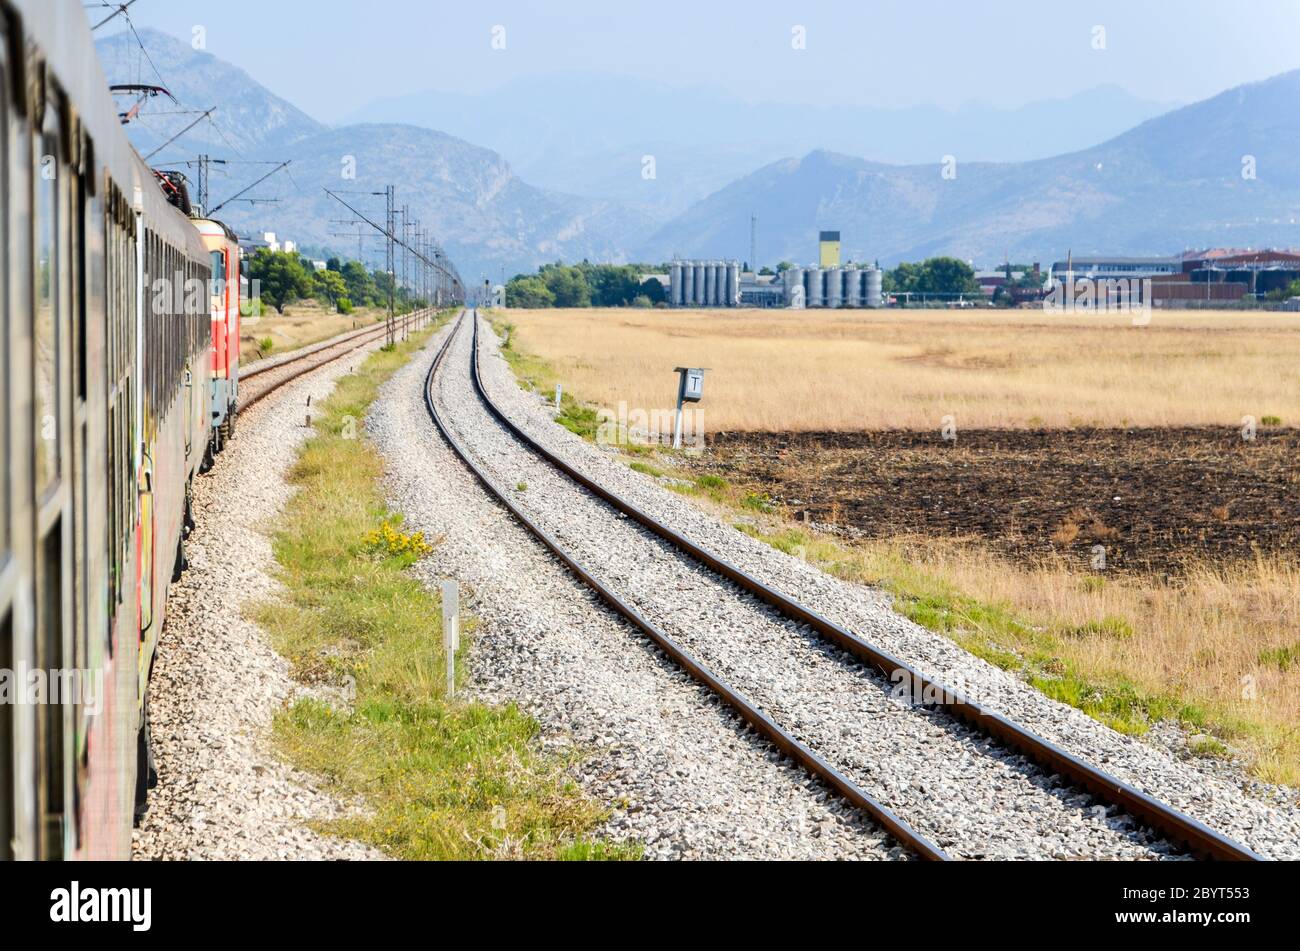 Views of Podgorica (Montenegrin capital) from the train along the Bar-Belgrade railway in the Balkans (Montenegro, Serbia) Stock Photo